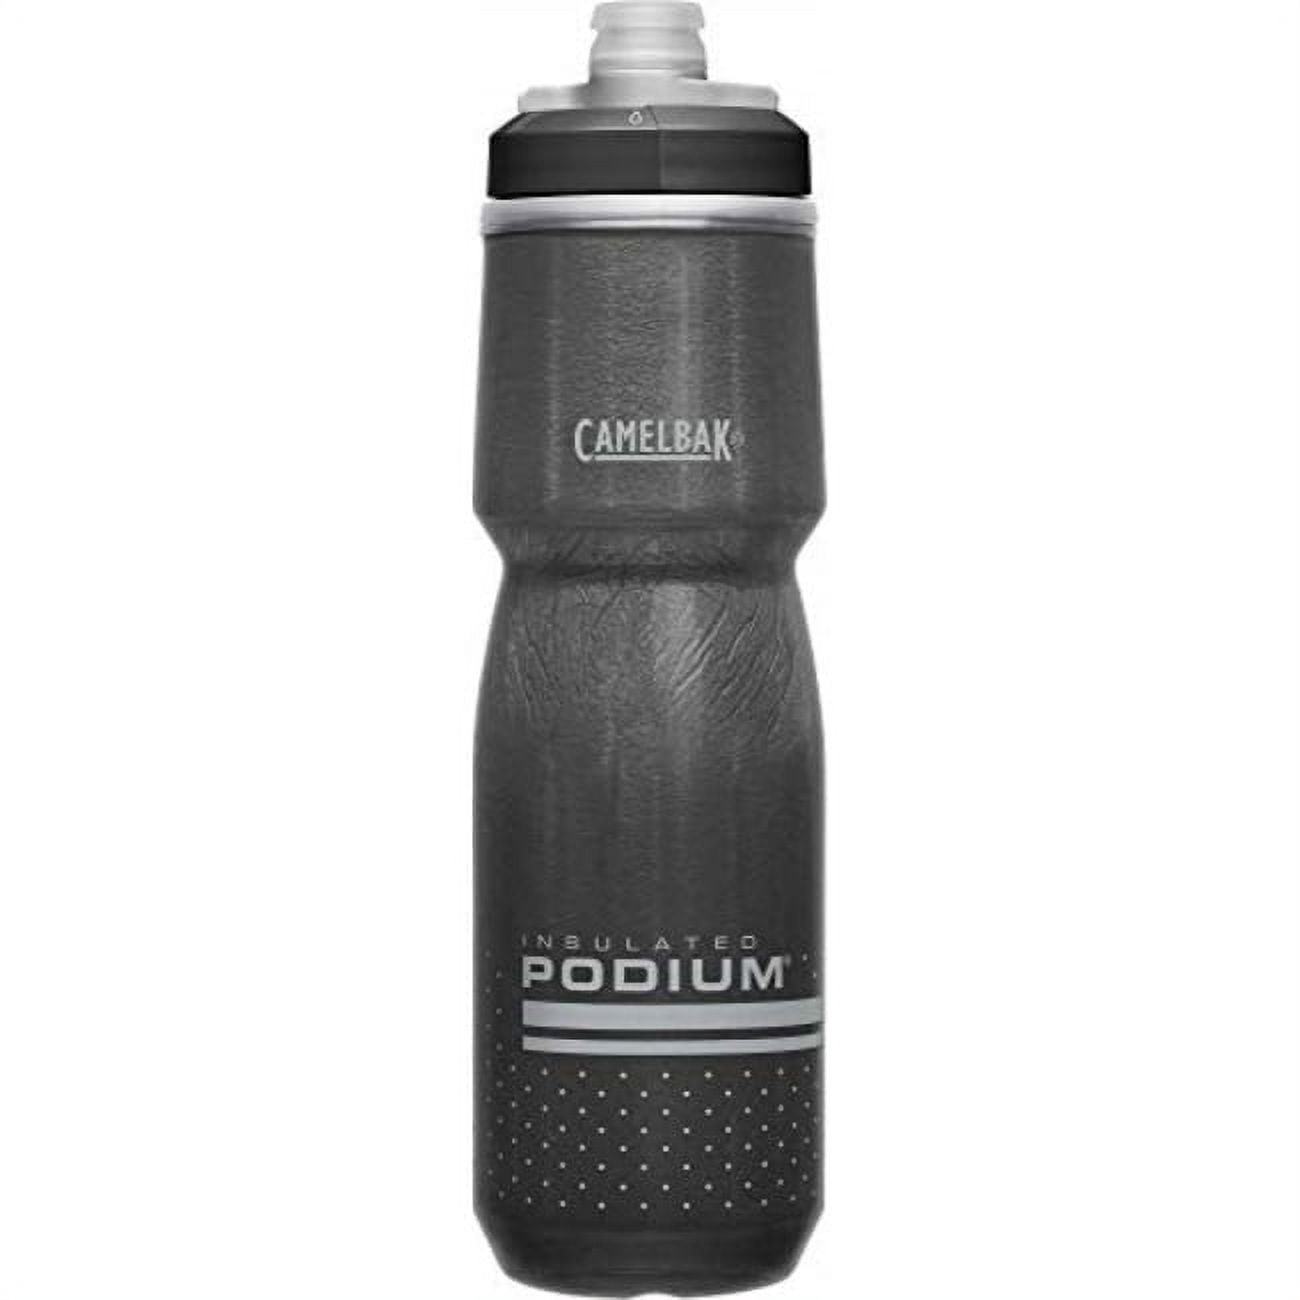 Native Camelbak Chute® Mag 40oz Water Bottle, Insulated Stainless Stee